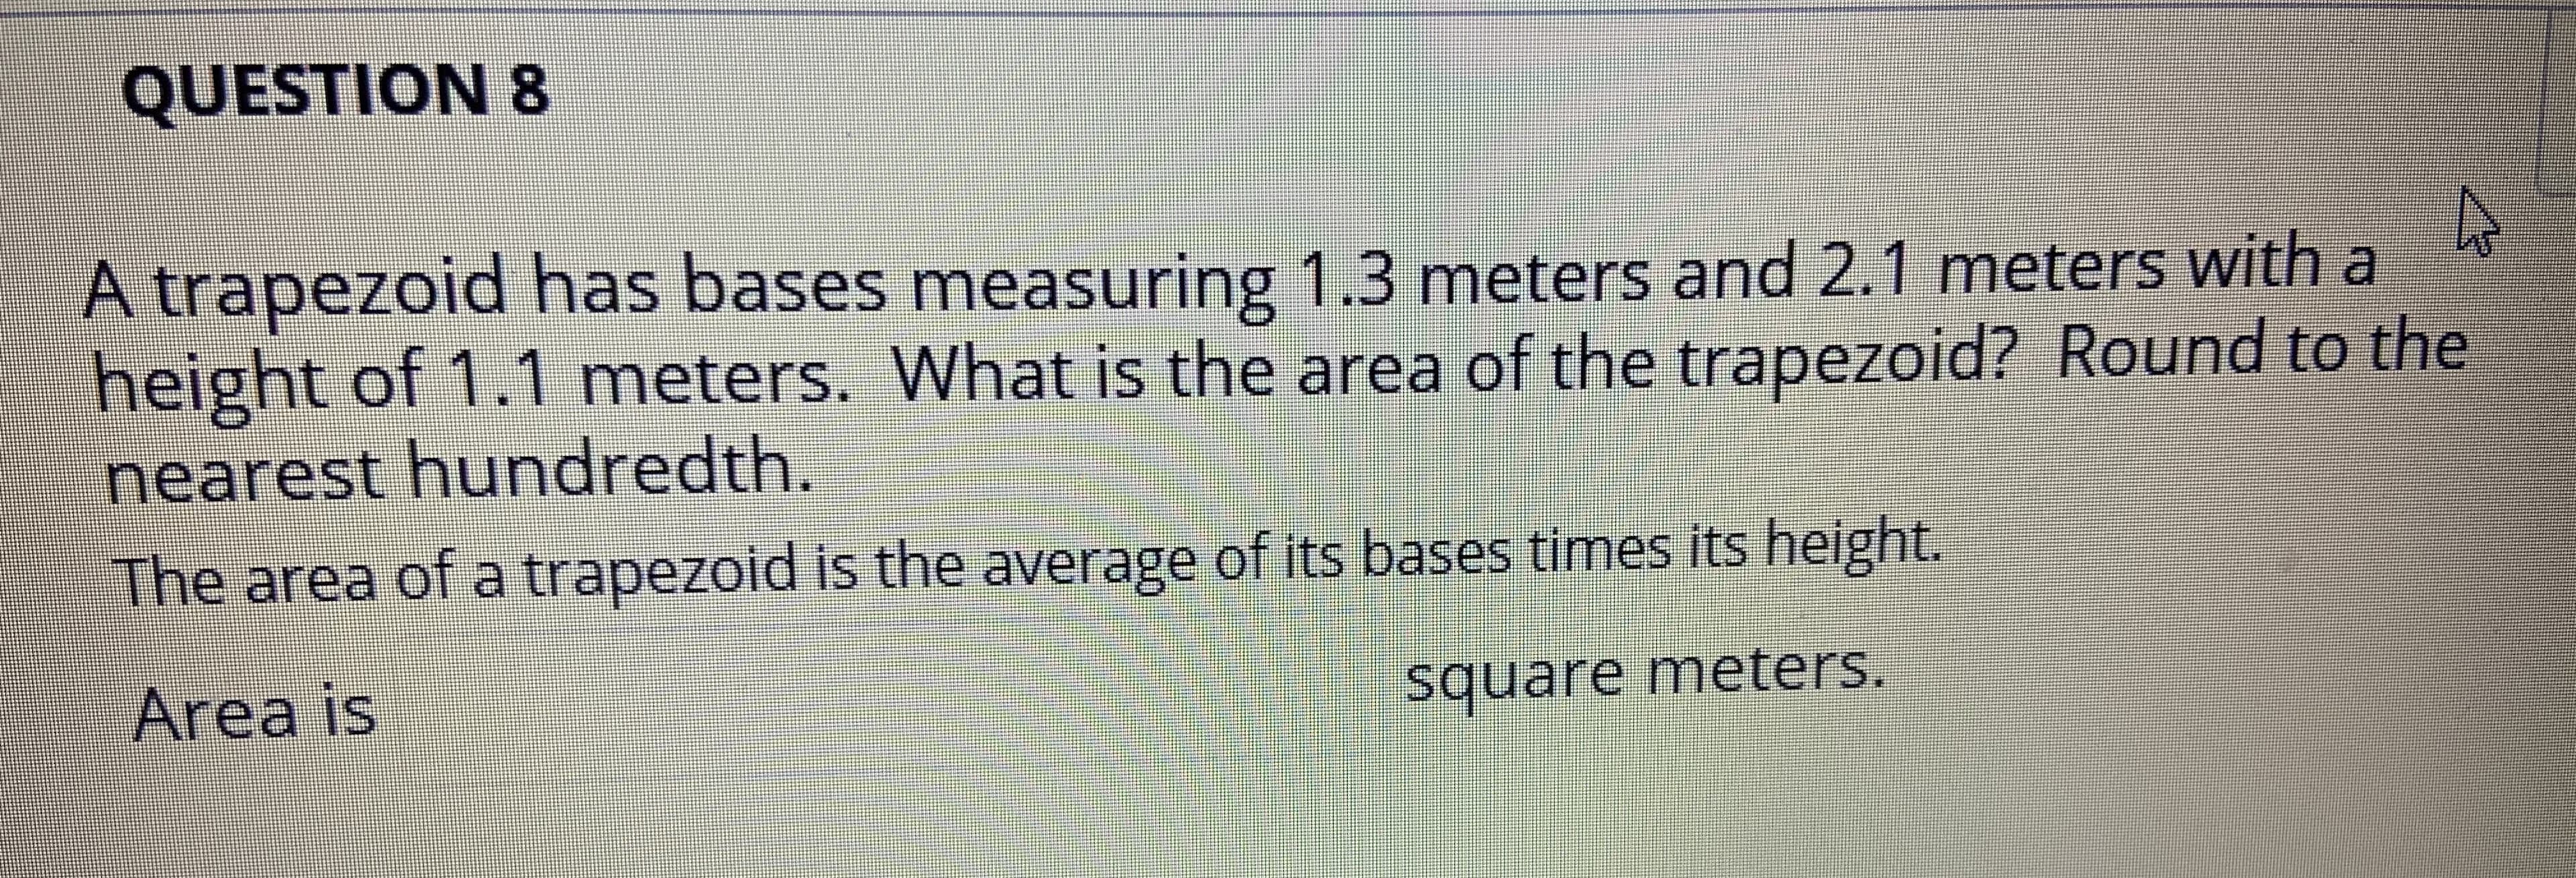 A trapezoid has bases measuring 1.3 meters and 2.1 meters with a
height of 1.1 meters. What is the area of the trapezoid? Round to the
